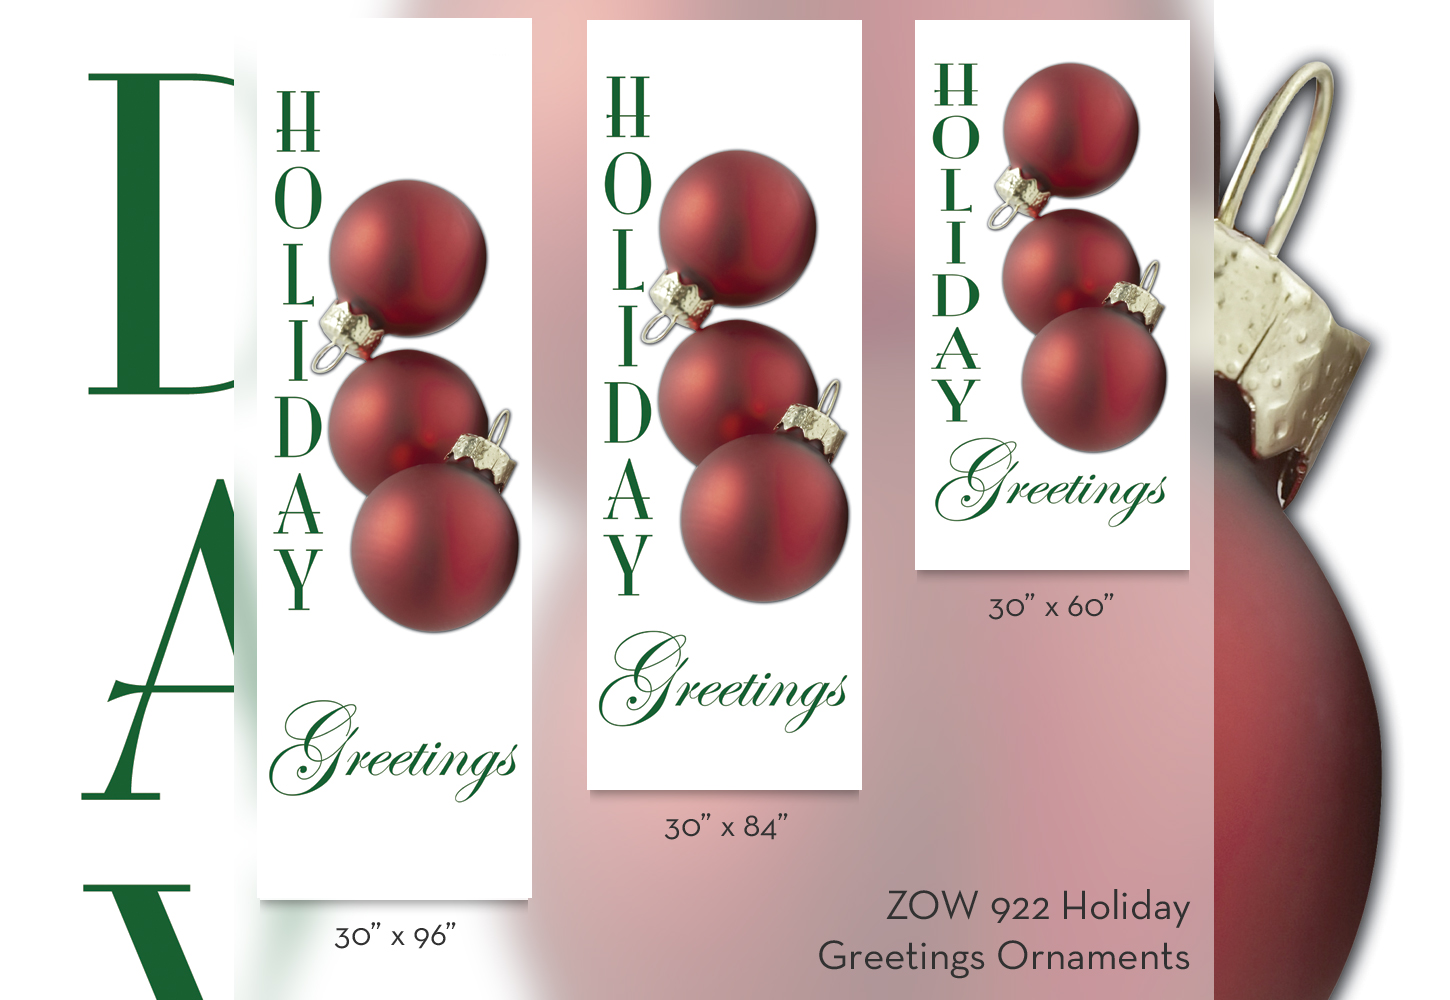 ZOW 922 Holiday Greetings Ornaments